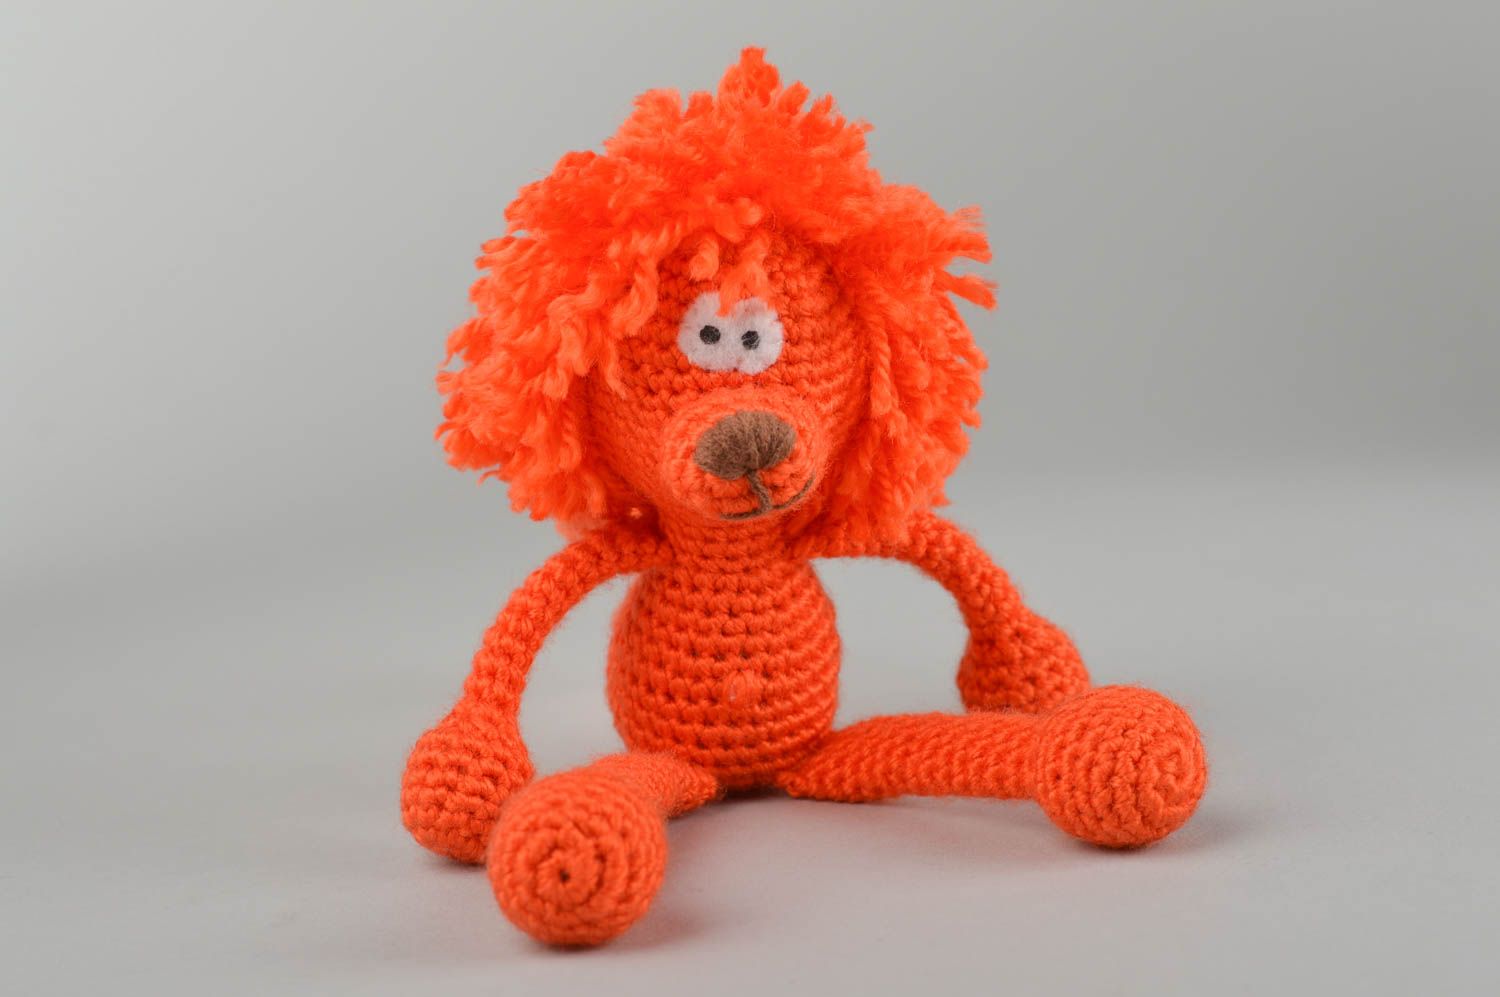 Handmade crocheted toy baby soft toy crocheted lion toy design crocheted toys   photo 4